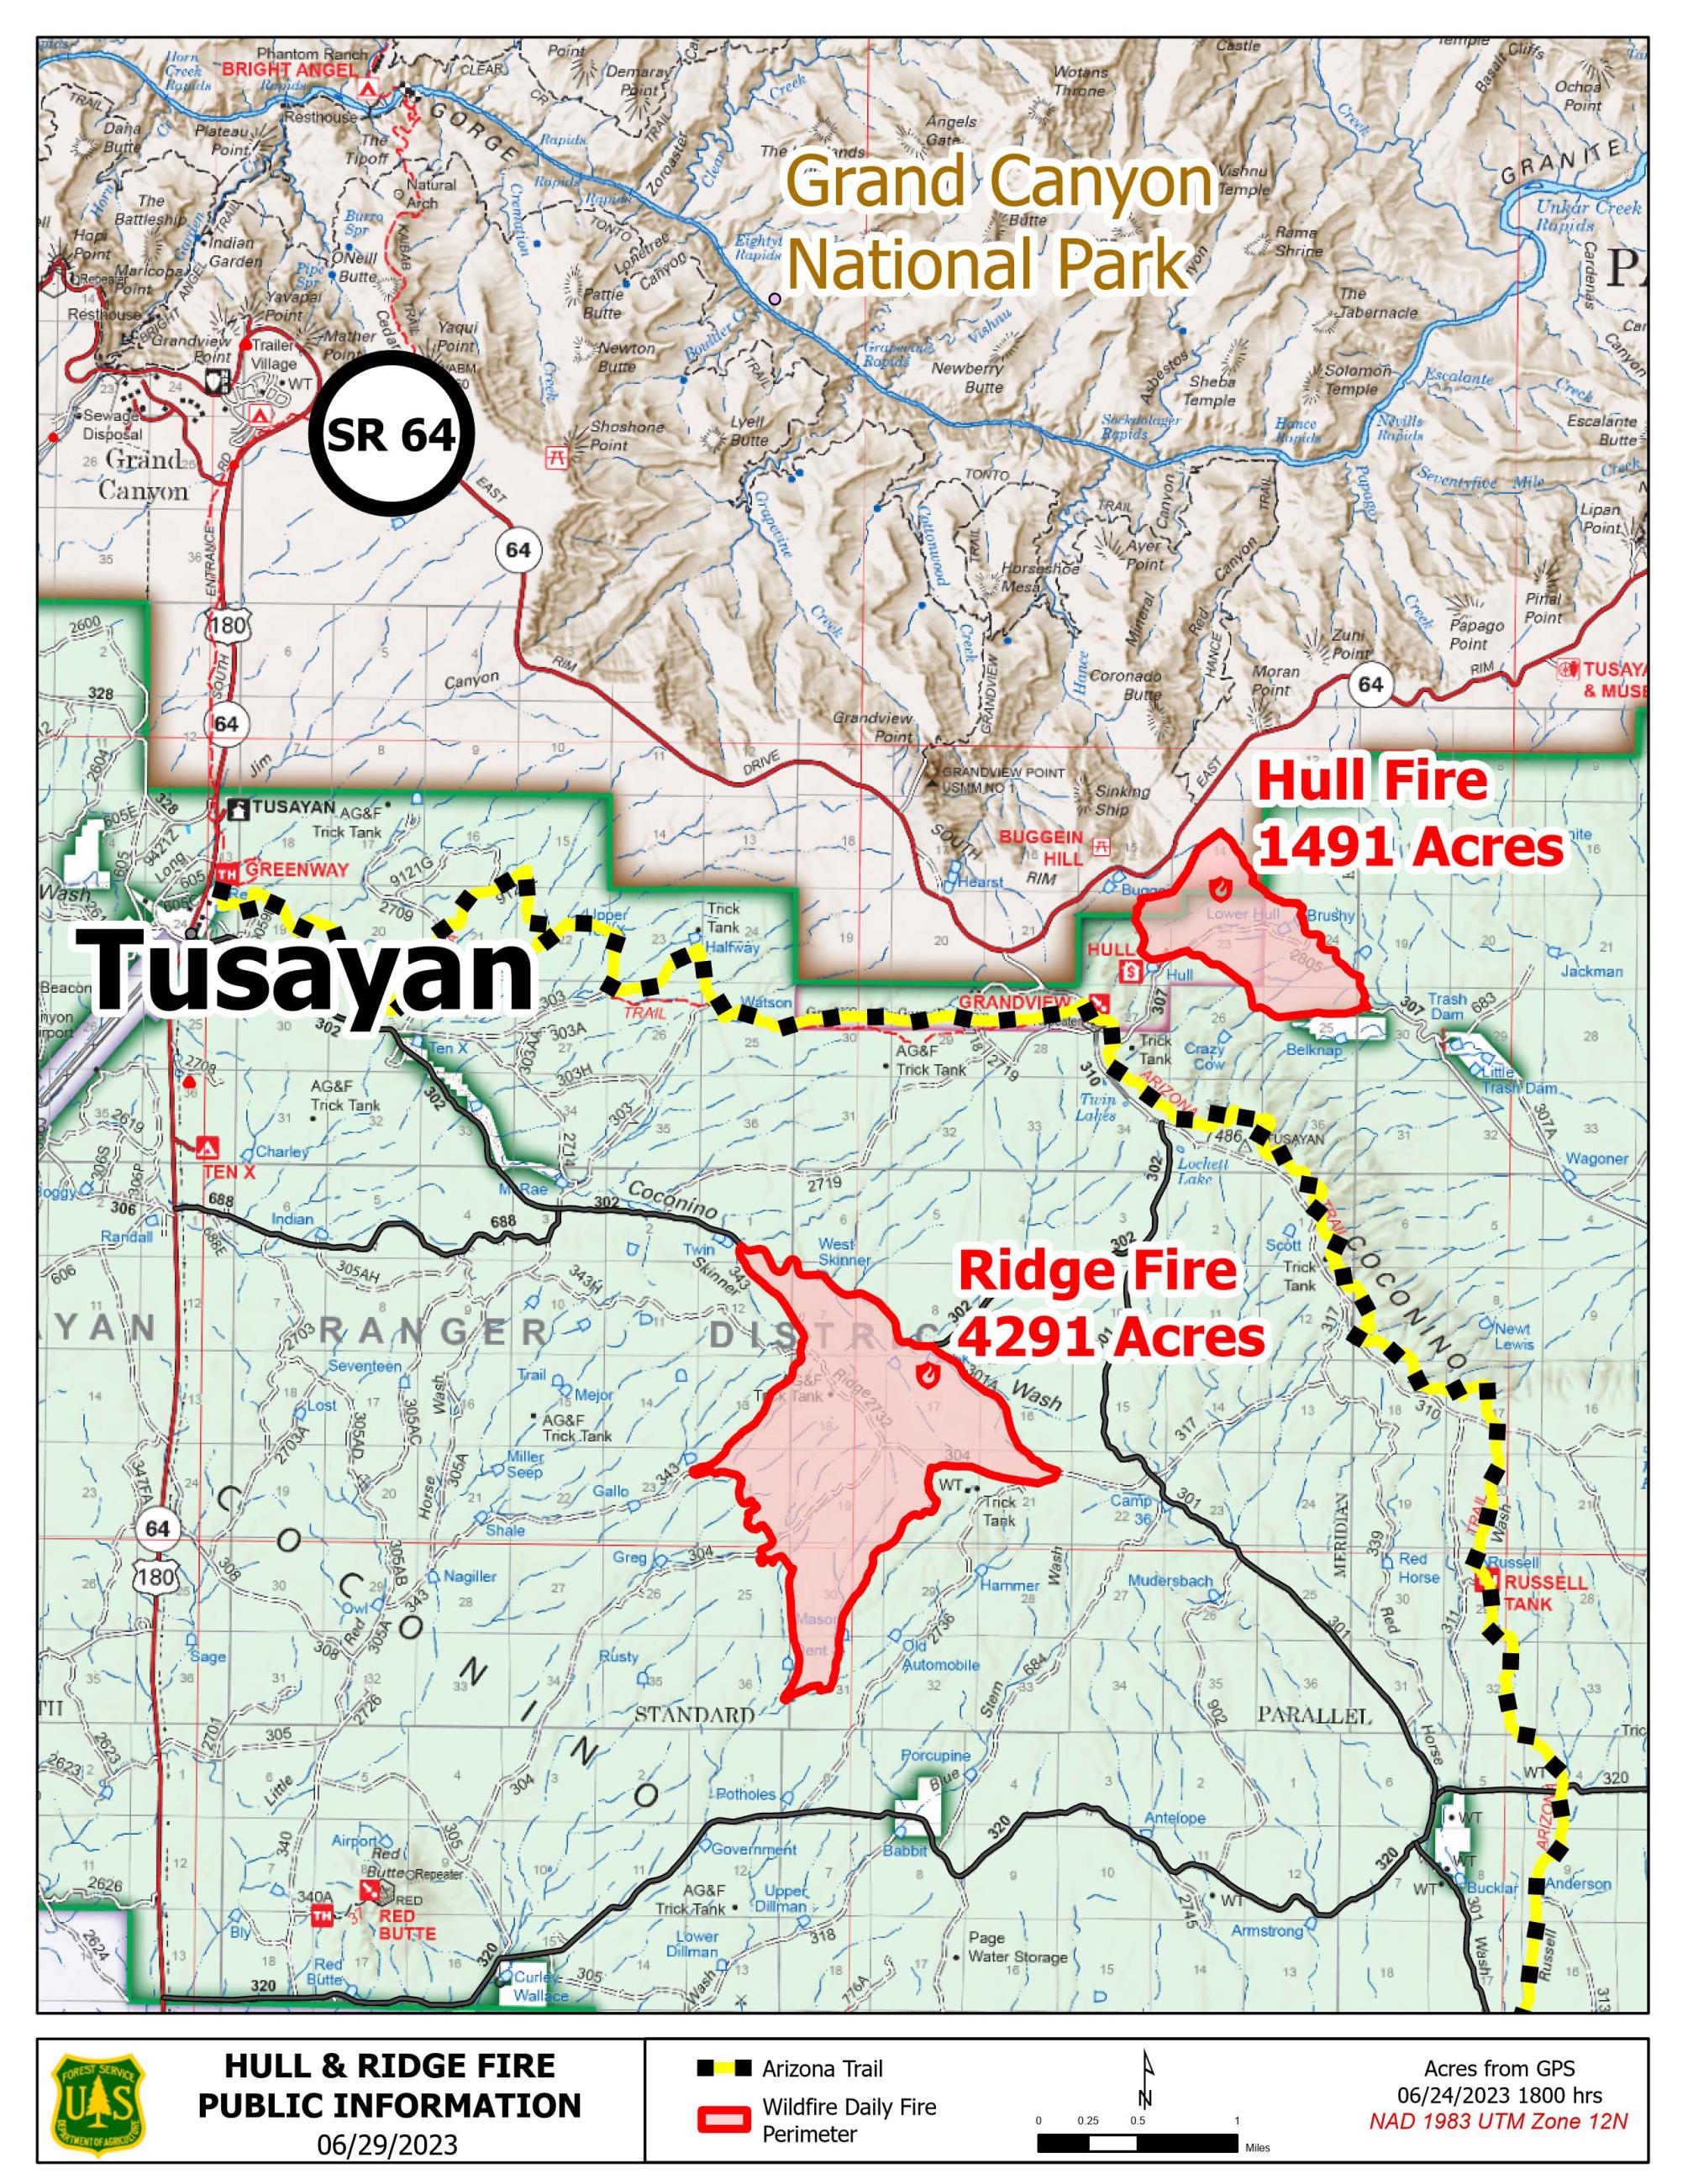 Map of the Ridge Fire area for 7/5